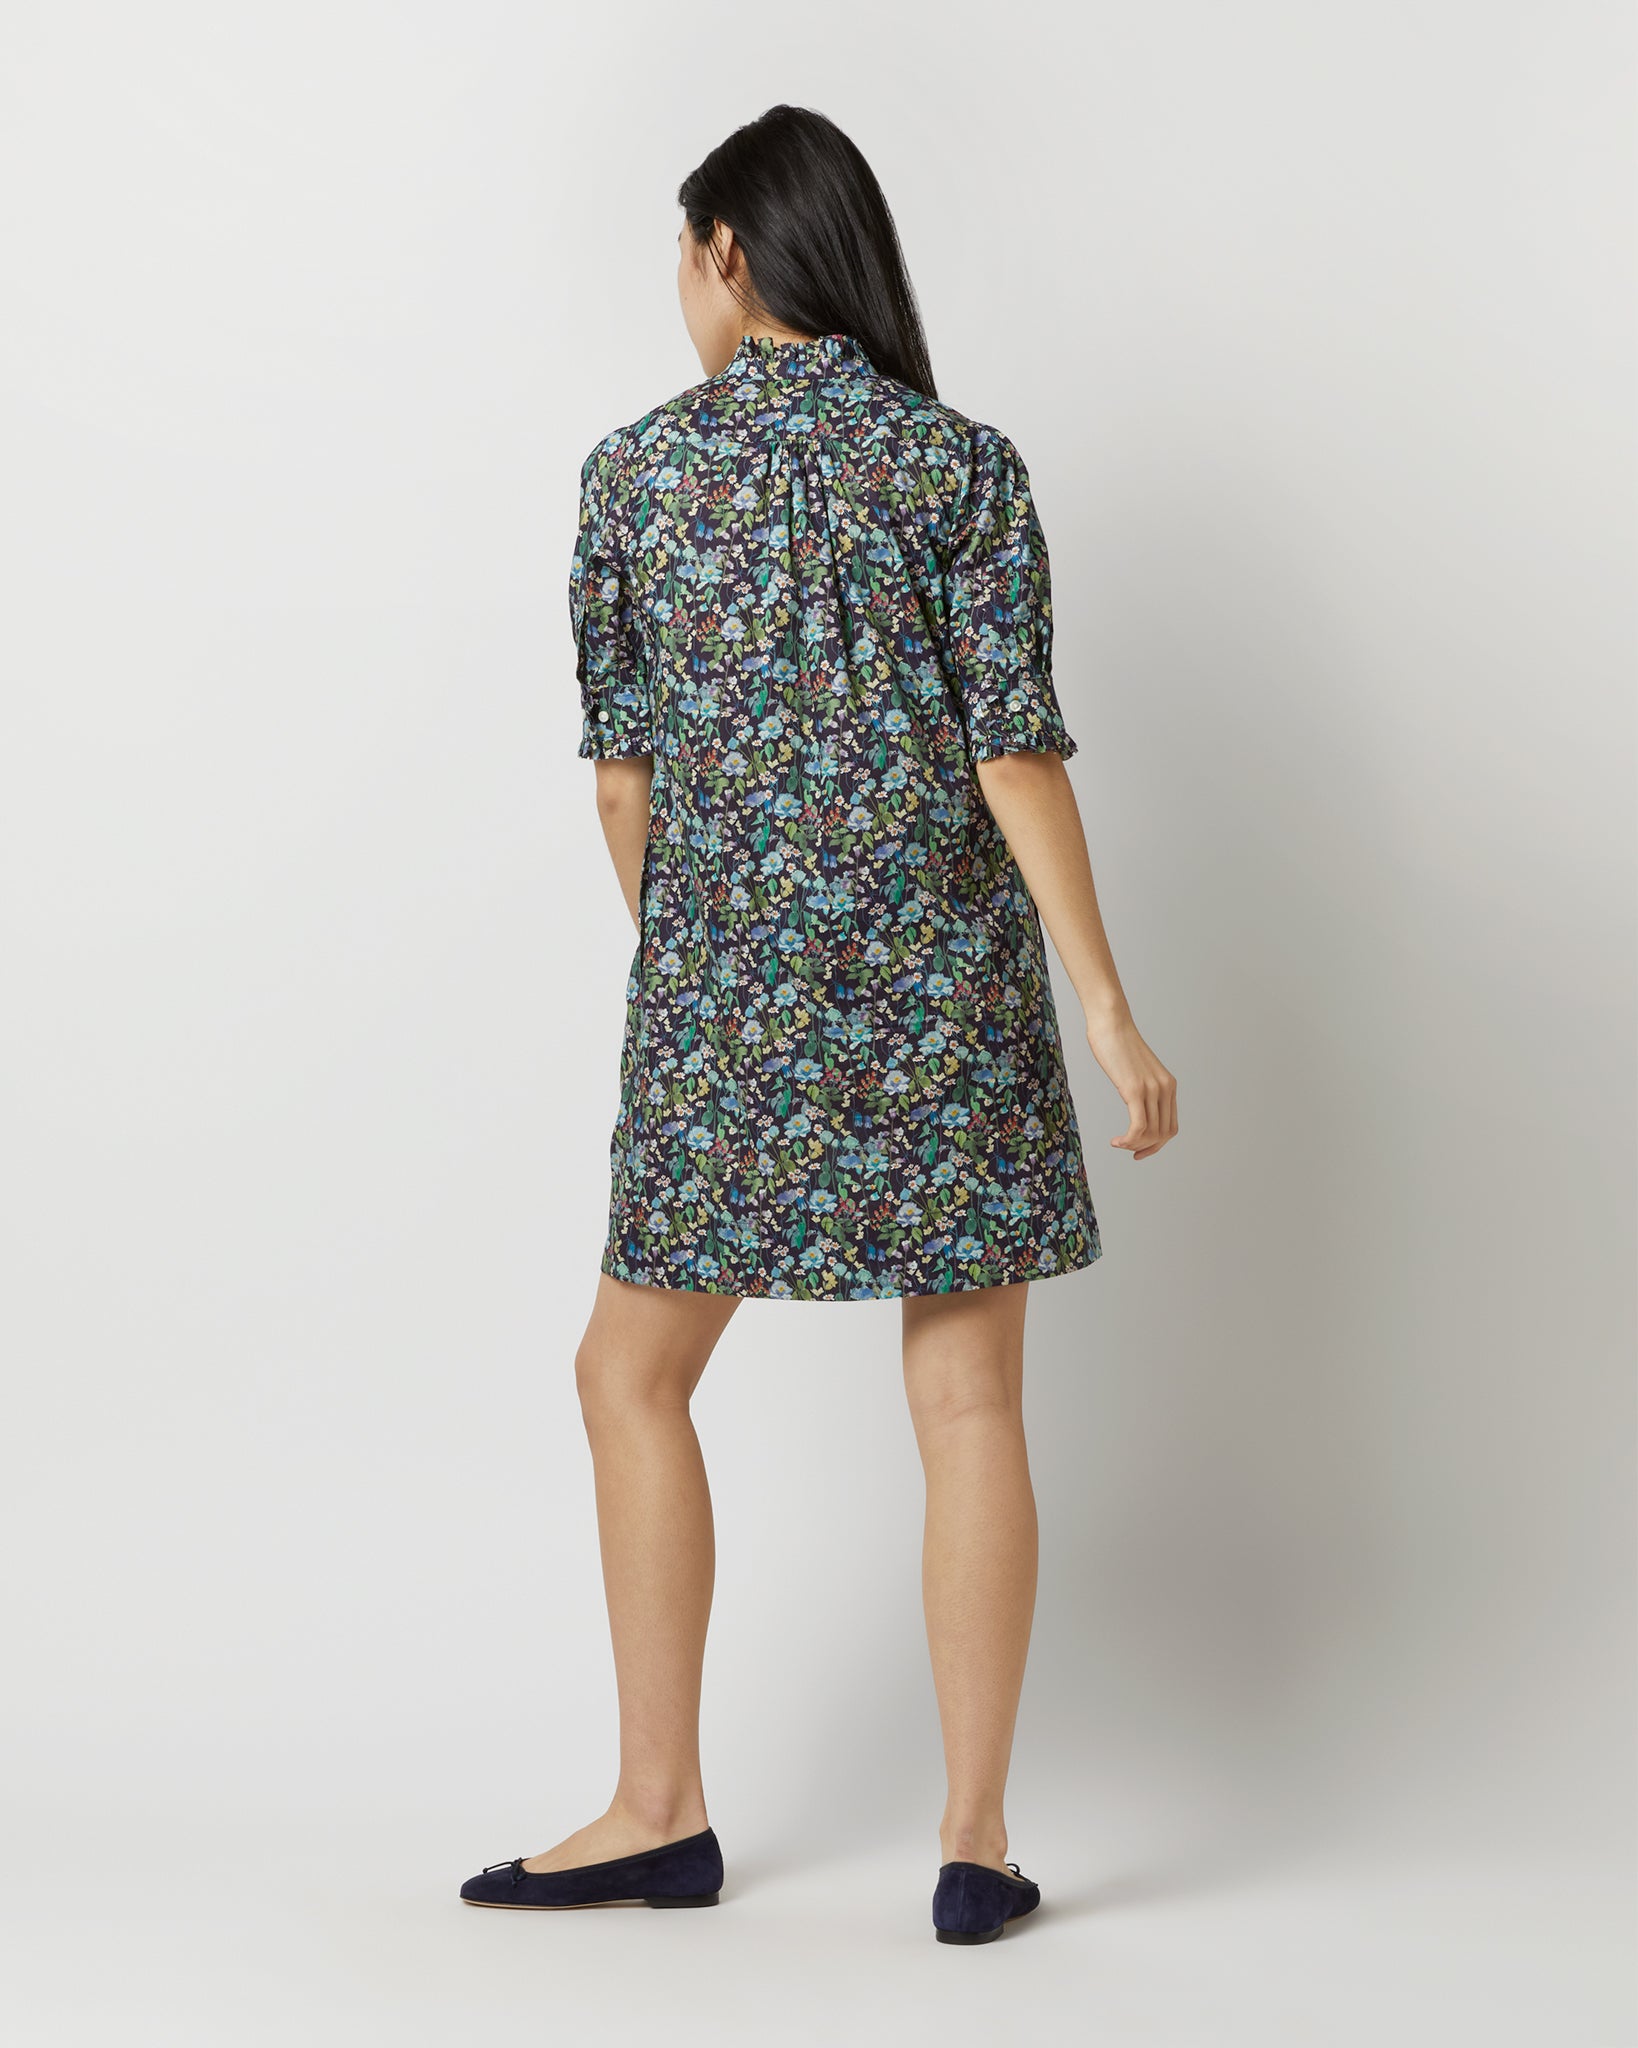 Elbow-Sleeved Frill Dress in Navy/Multi Fairytale Forest Liberty Fabric